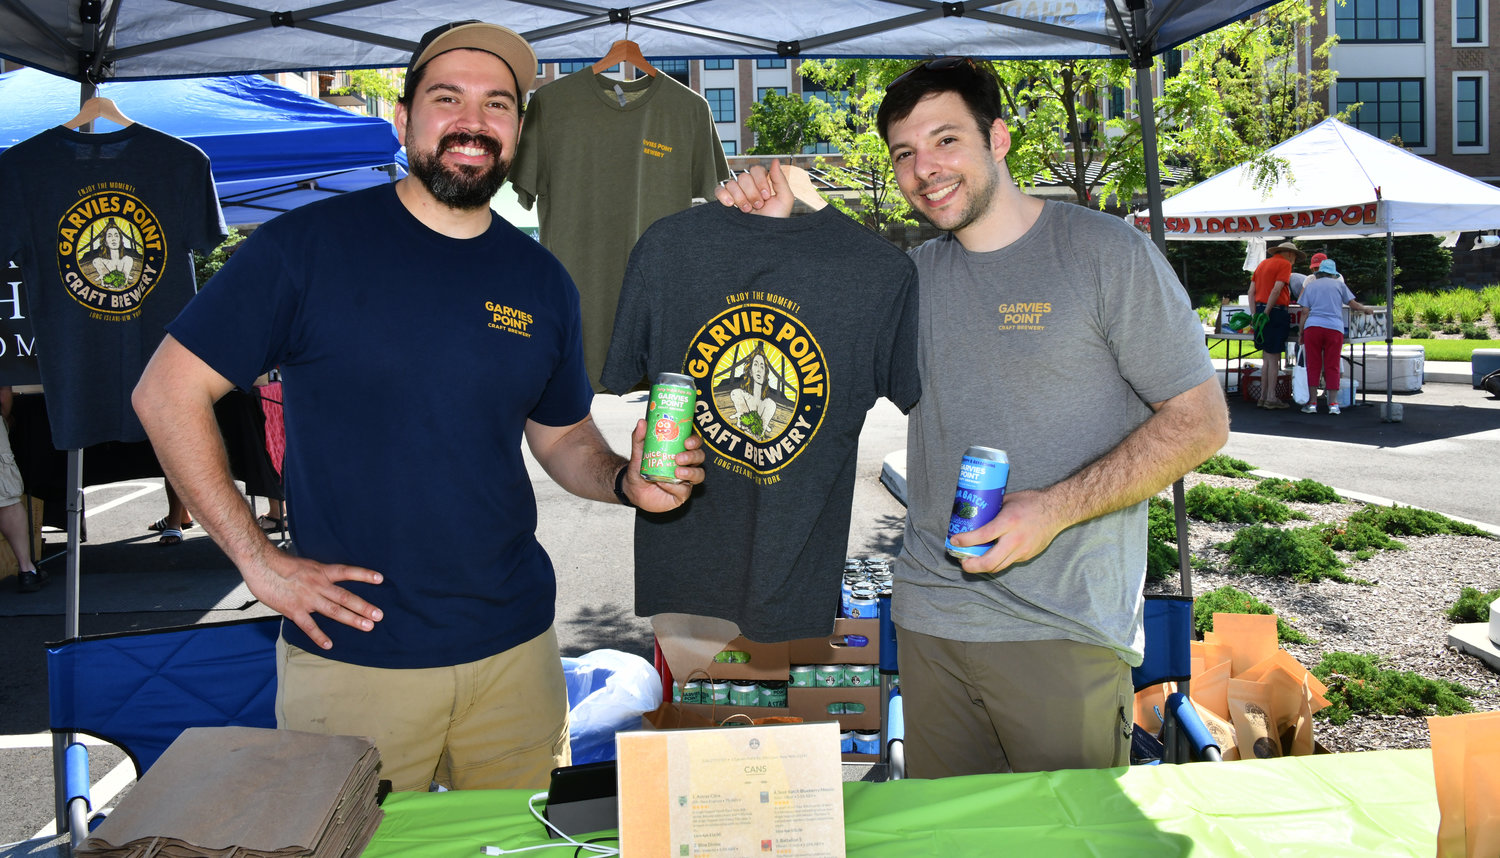 Kevin Hogan and Mark Scoroposki of Garvies Point Brewery were happy to be a part of the market and promote their business, which is located across the street.